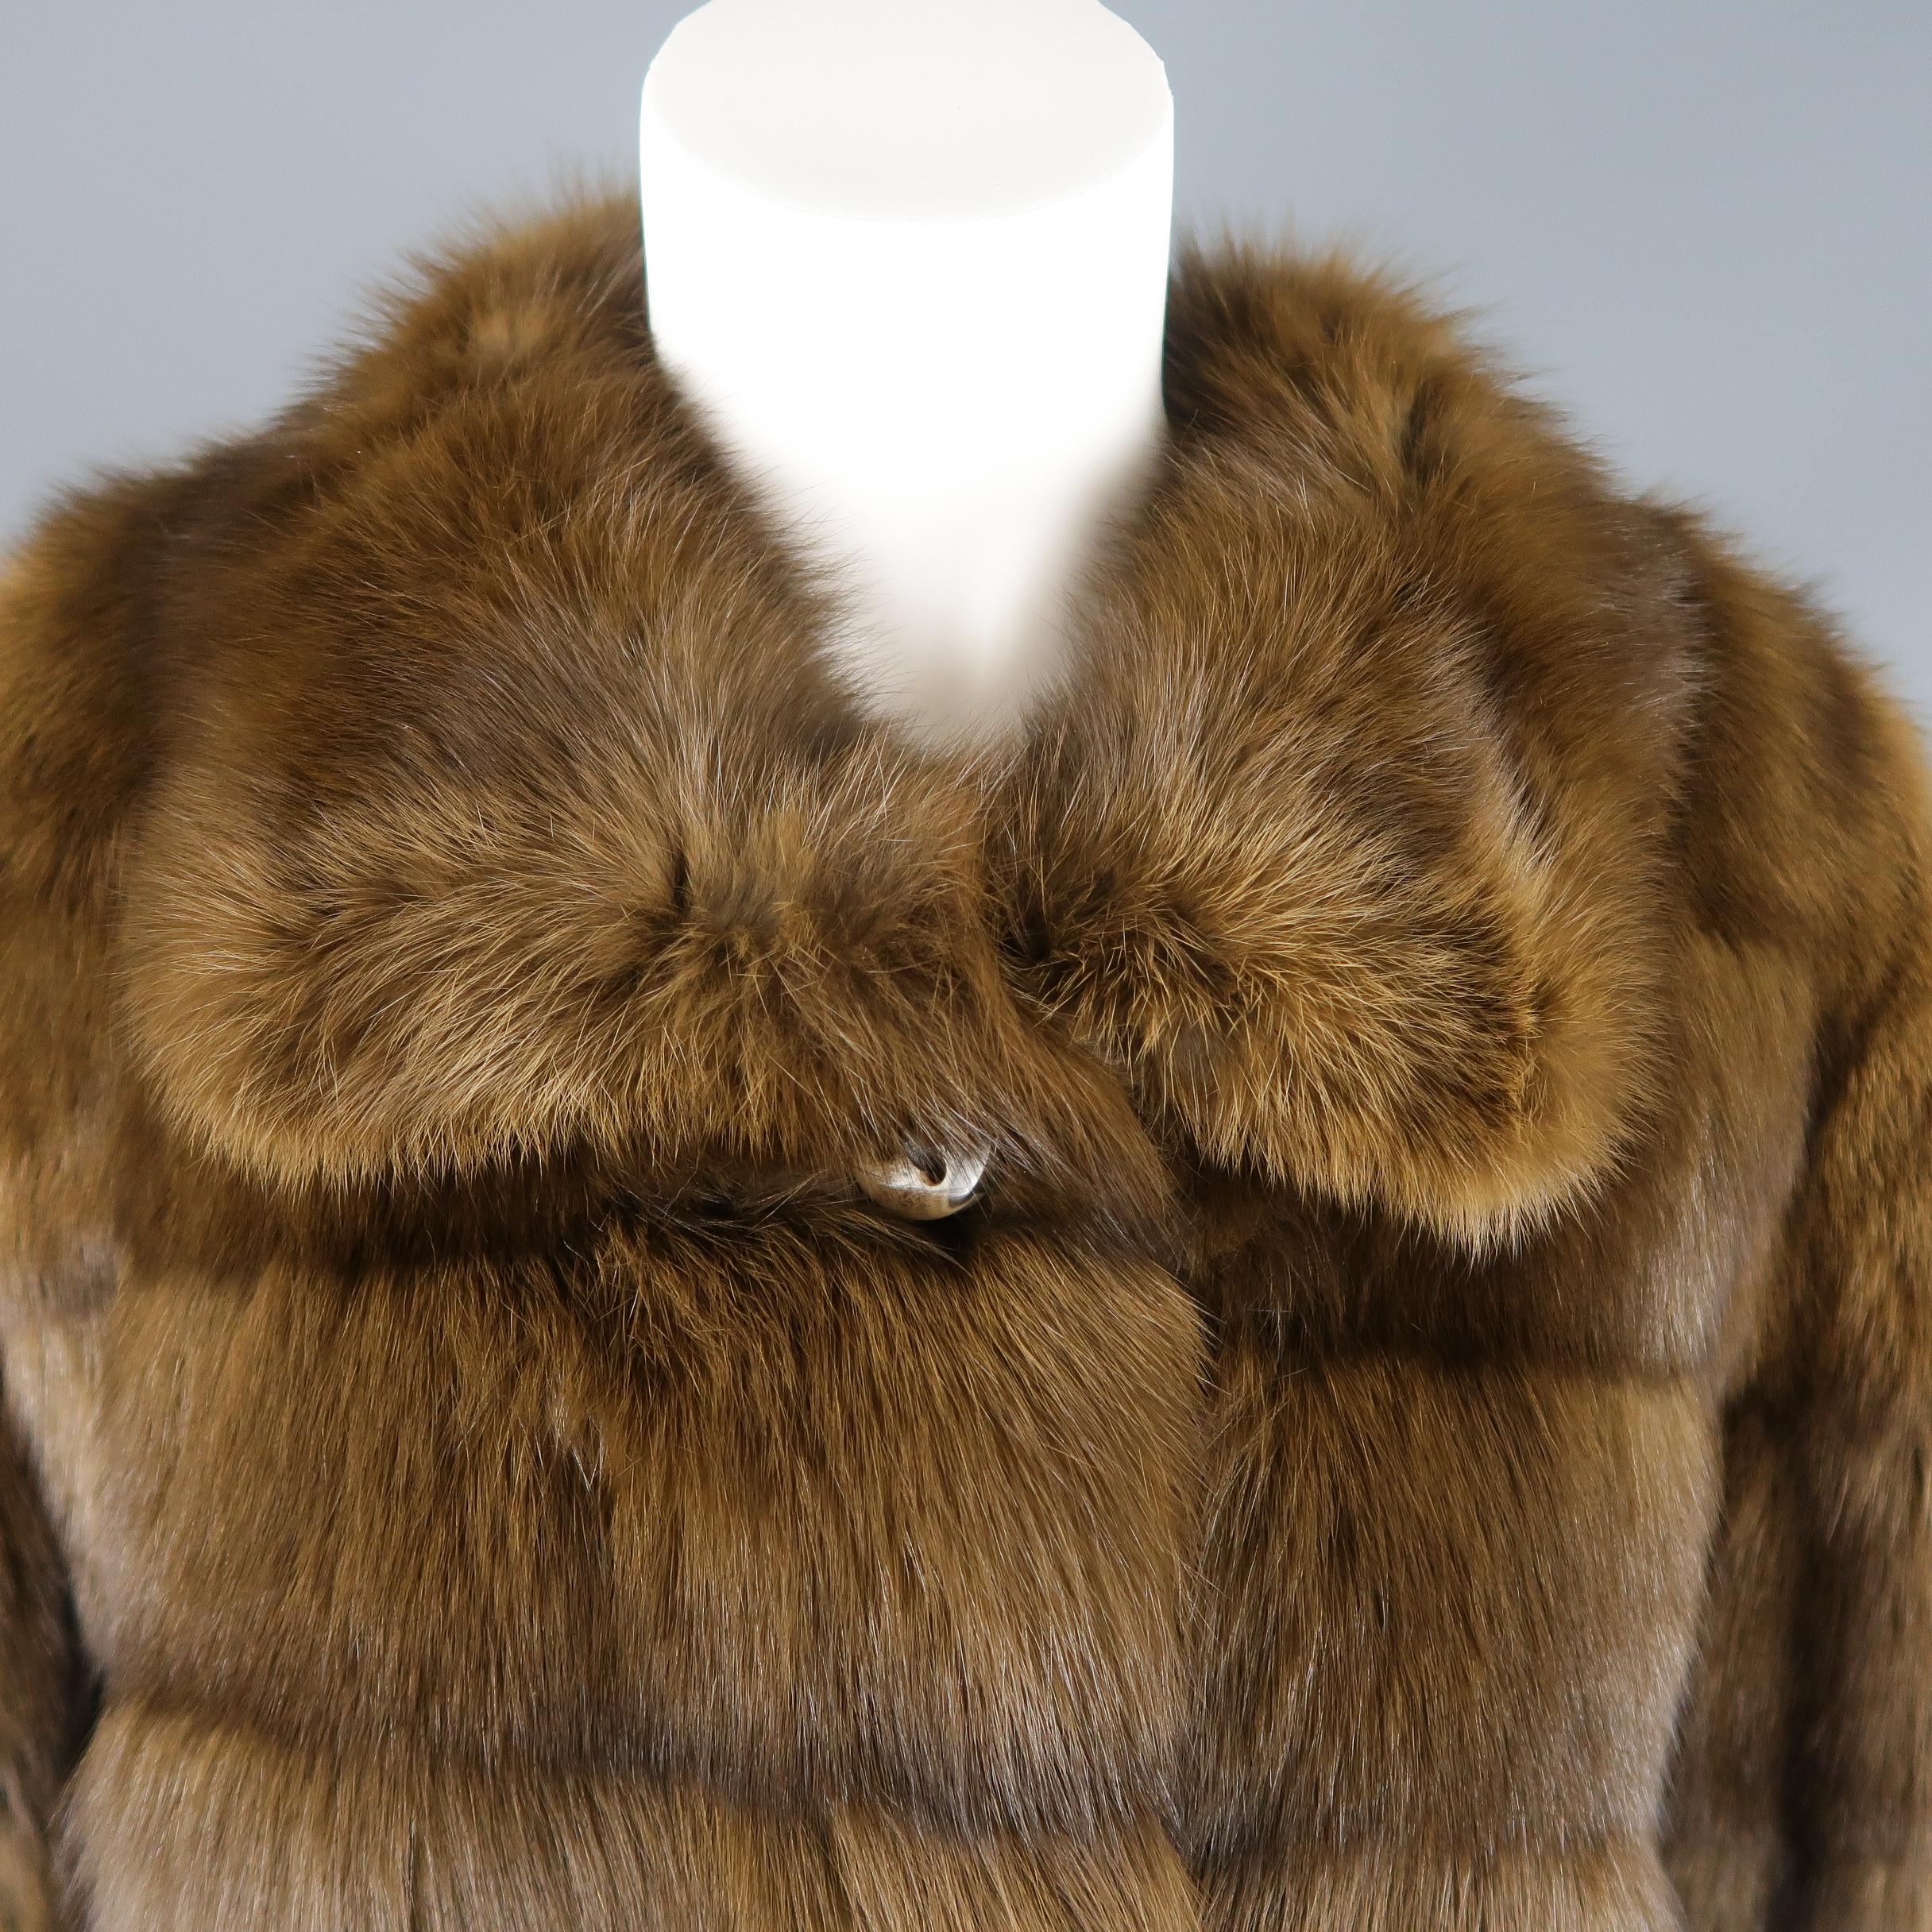 ALTIOLI jacket comes in soft brown sable fur with a collar, three leather tied button closure, slit pockets, and satin liner.
 
Excellent Pre-Owned Condition.
Marked: (no size)
 
Measurements:
Shoulder: 17 in.
Bust: 42 in.
Sleeve: 24 in.
Length: 25